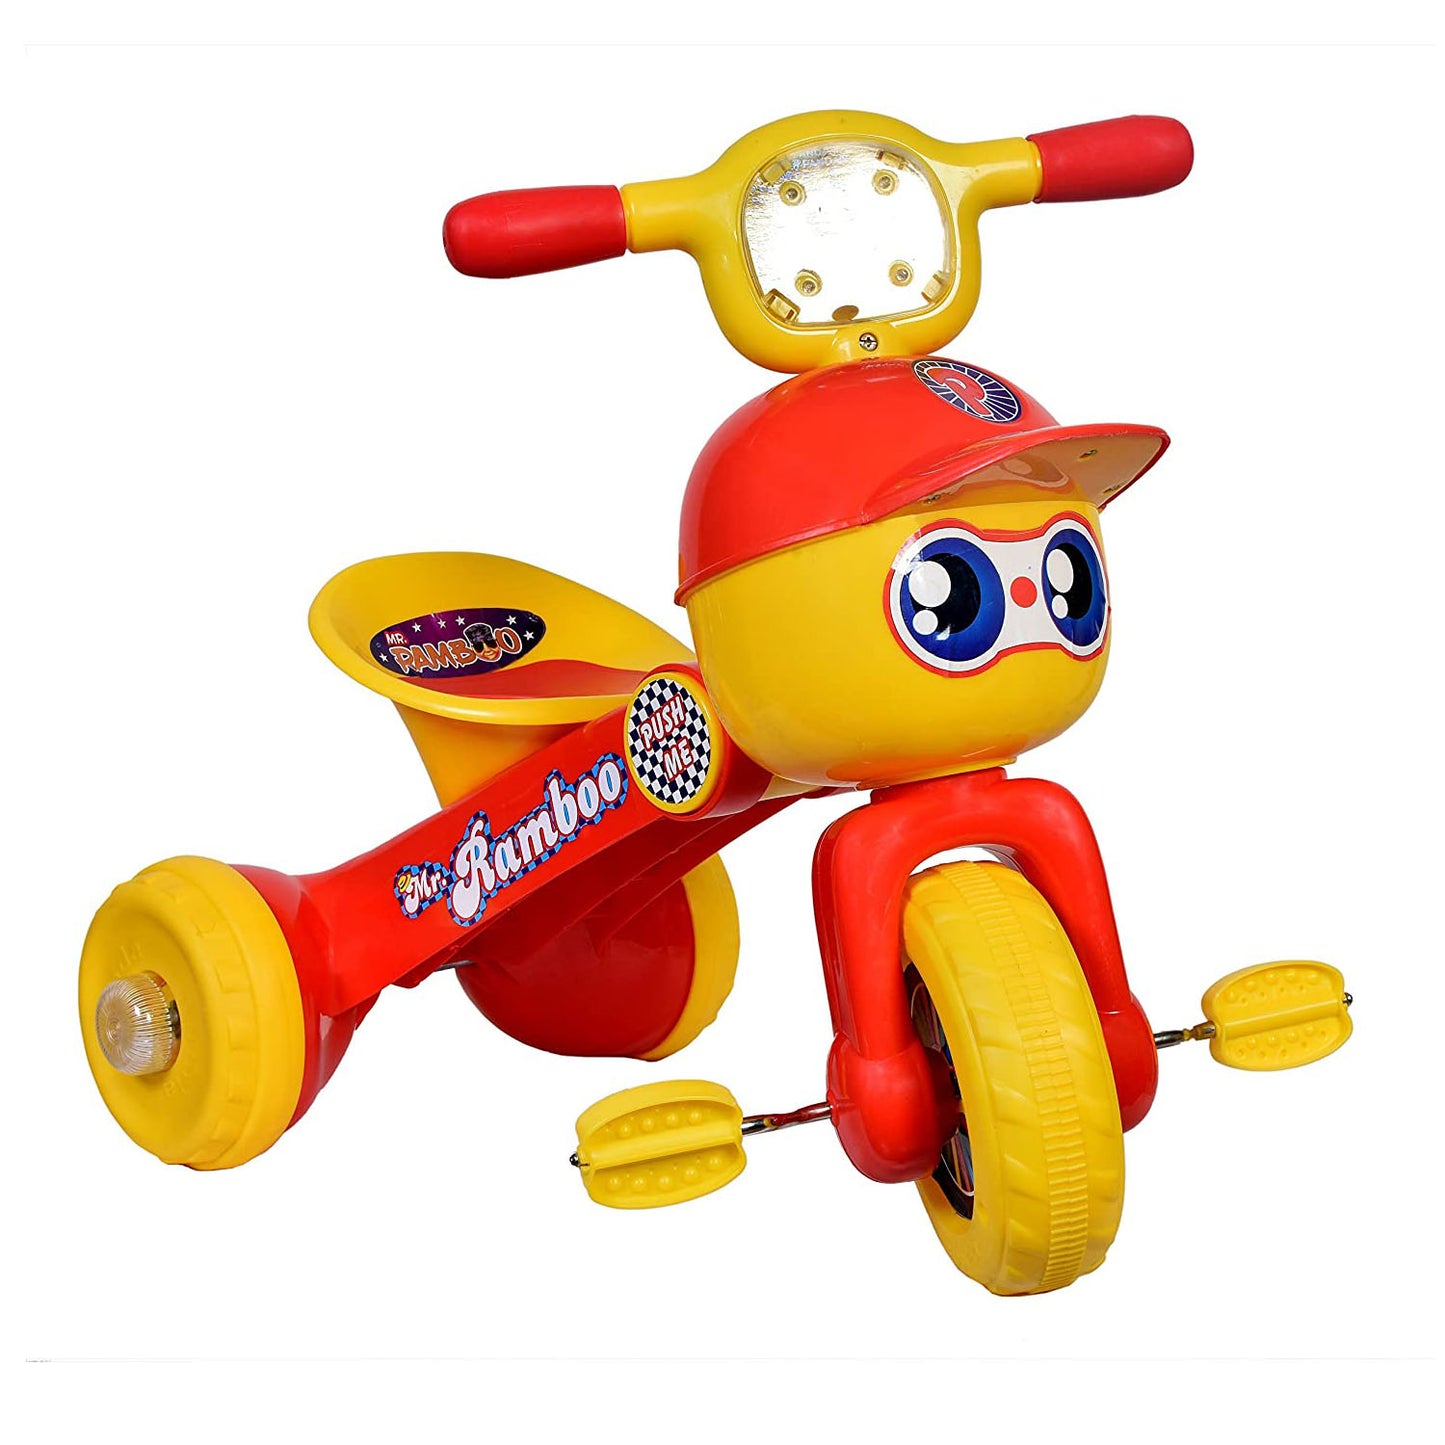 Panda Mr. Rambo Baby Tricycle Ride On Bicycle - Foldable Rider with Music & Lights